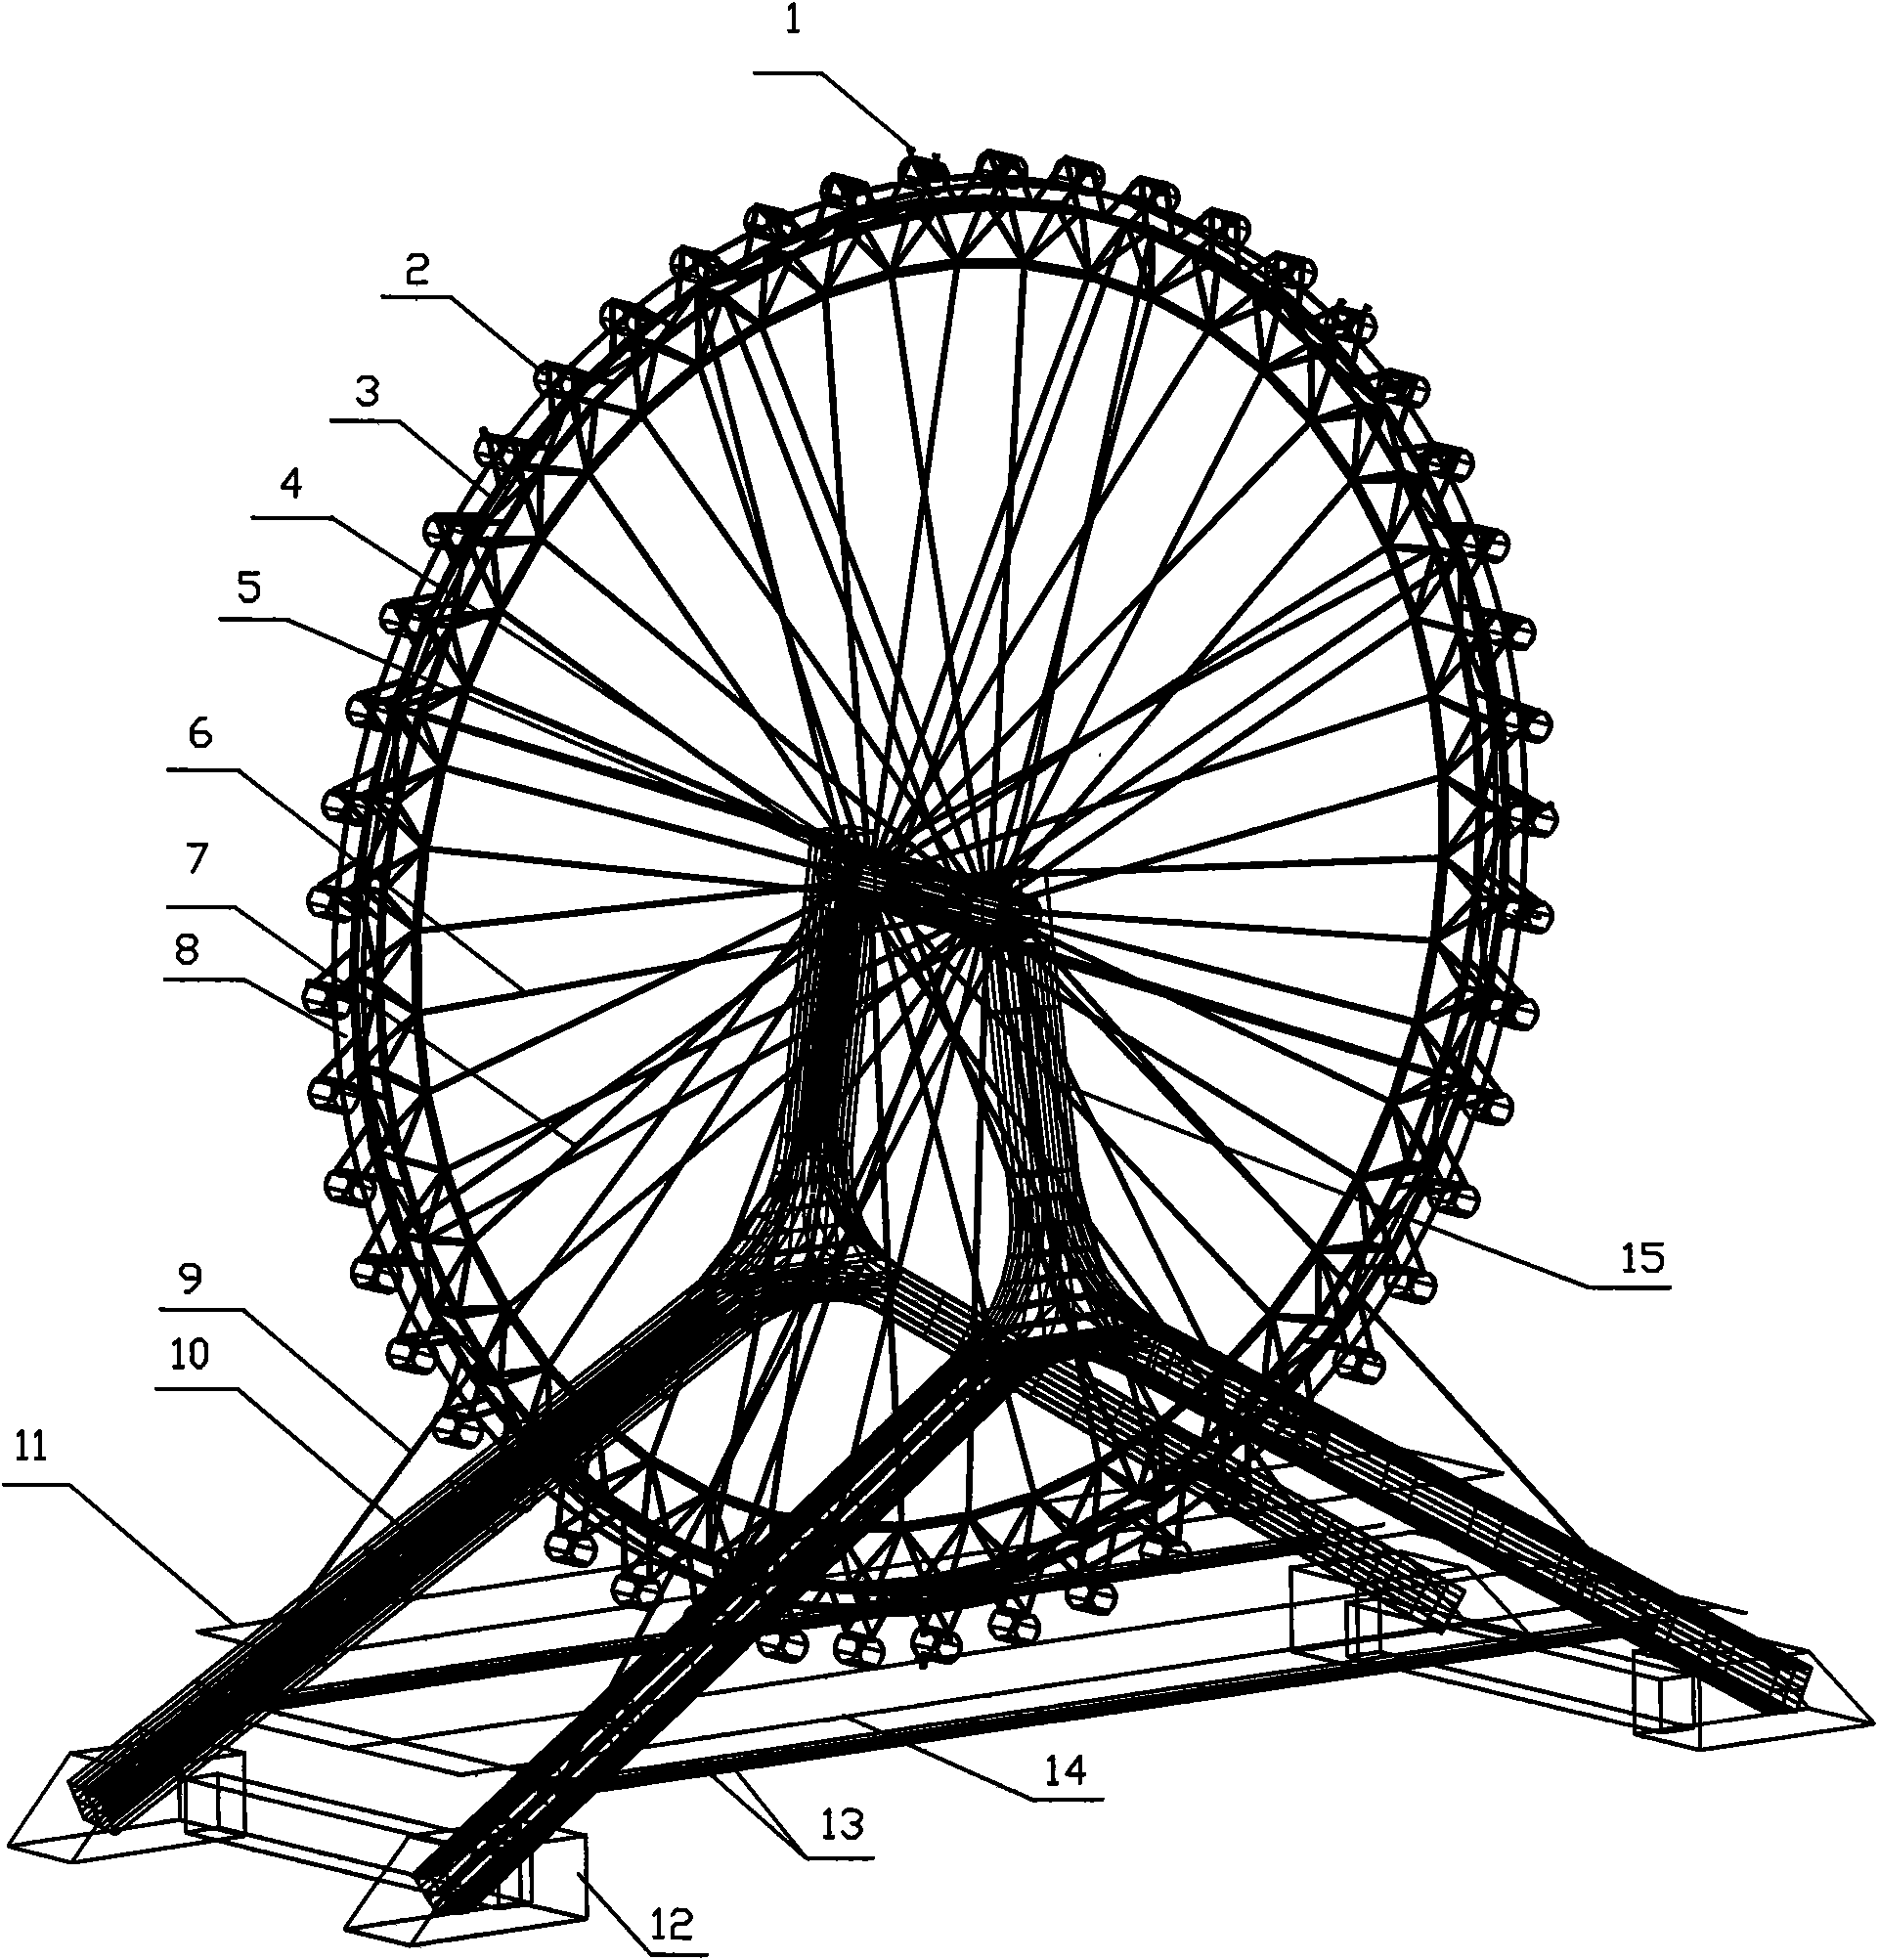 Towed rotary vertical section-to-section assembling construction system for large-sized spoke type ferris wheel disc